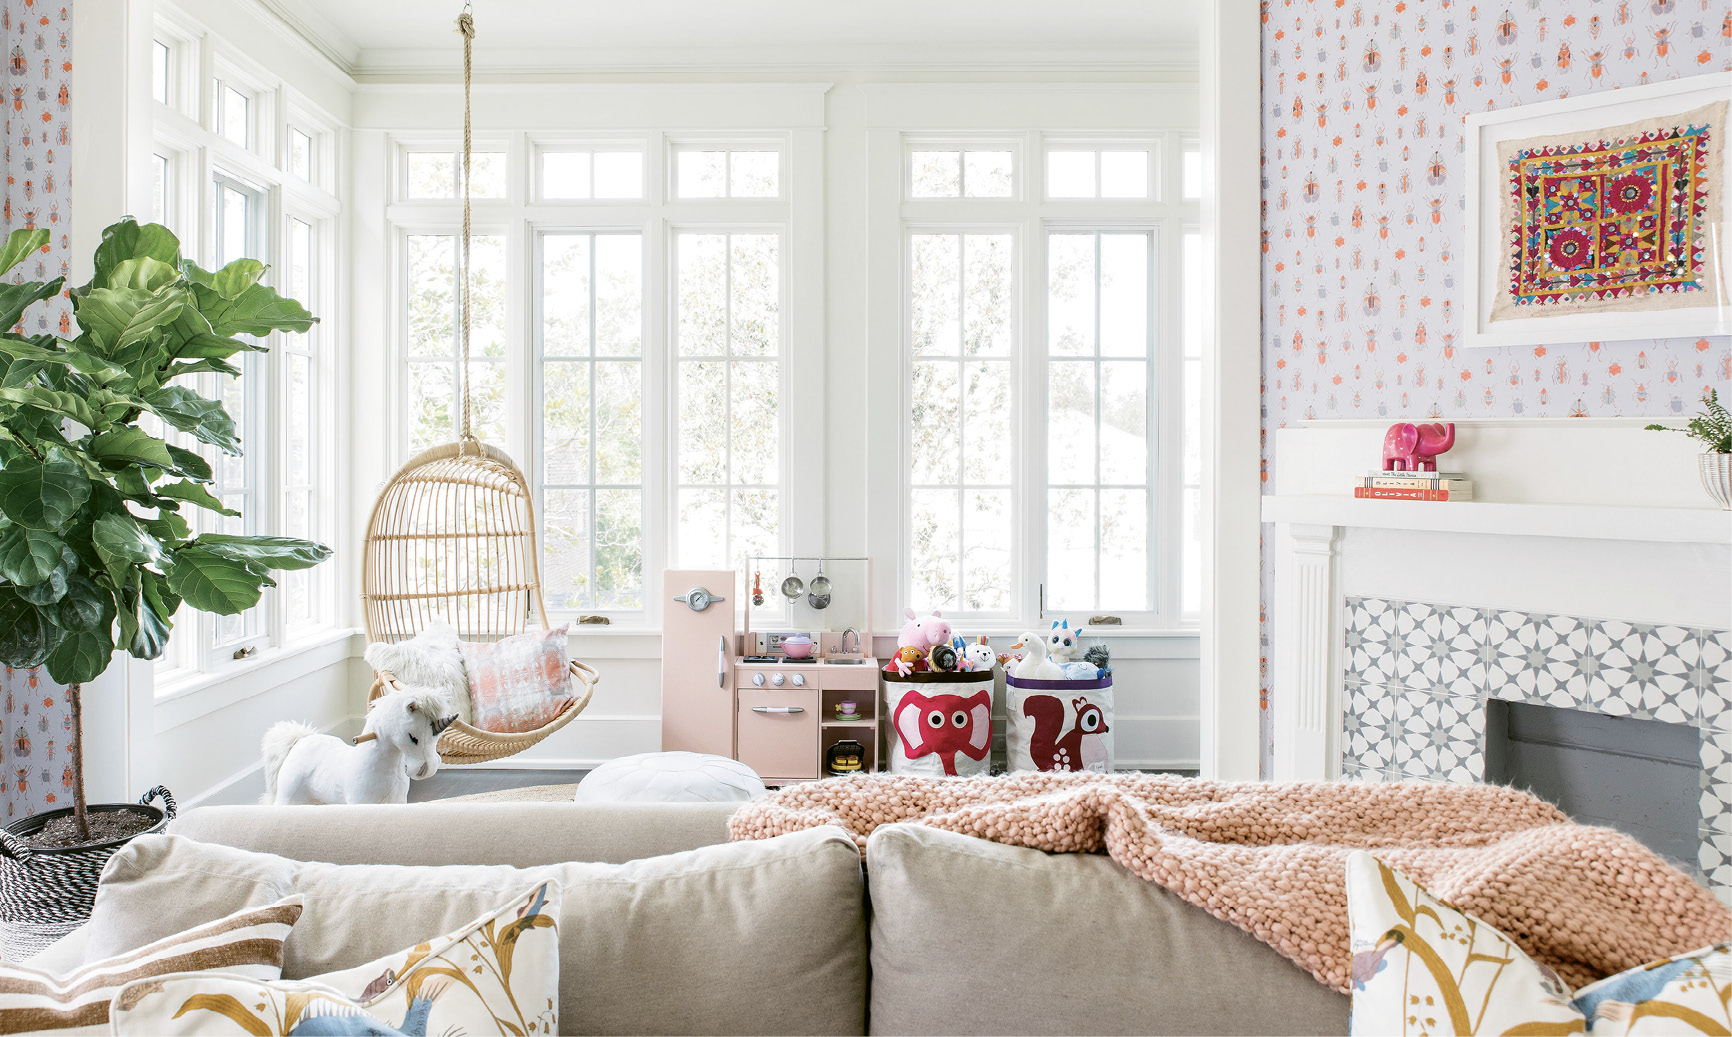 In the vibrant playroom, comfy, kid-friendly furniture—like the Serena &amp; Lily hanging chair and Lee Industries pullout sofa outfitted in performance fabric—mix with playful décor, including a vintage textile interior designer Melissa Lenox found in Jodhpur, India, and Lulie Wallace’s “Meyers” wallpaper.